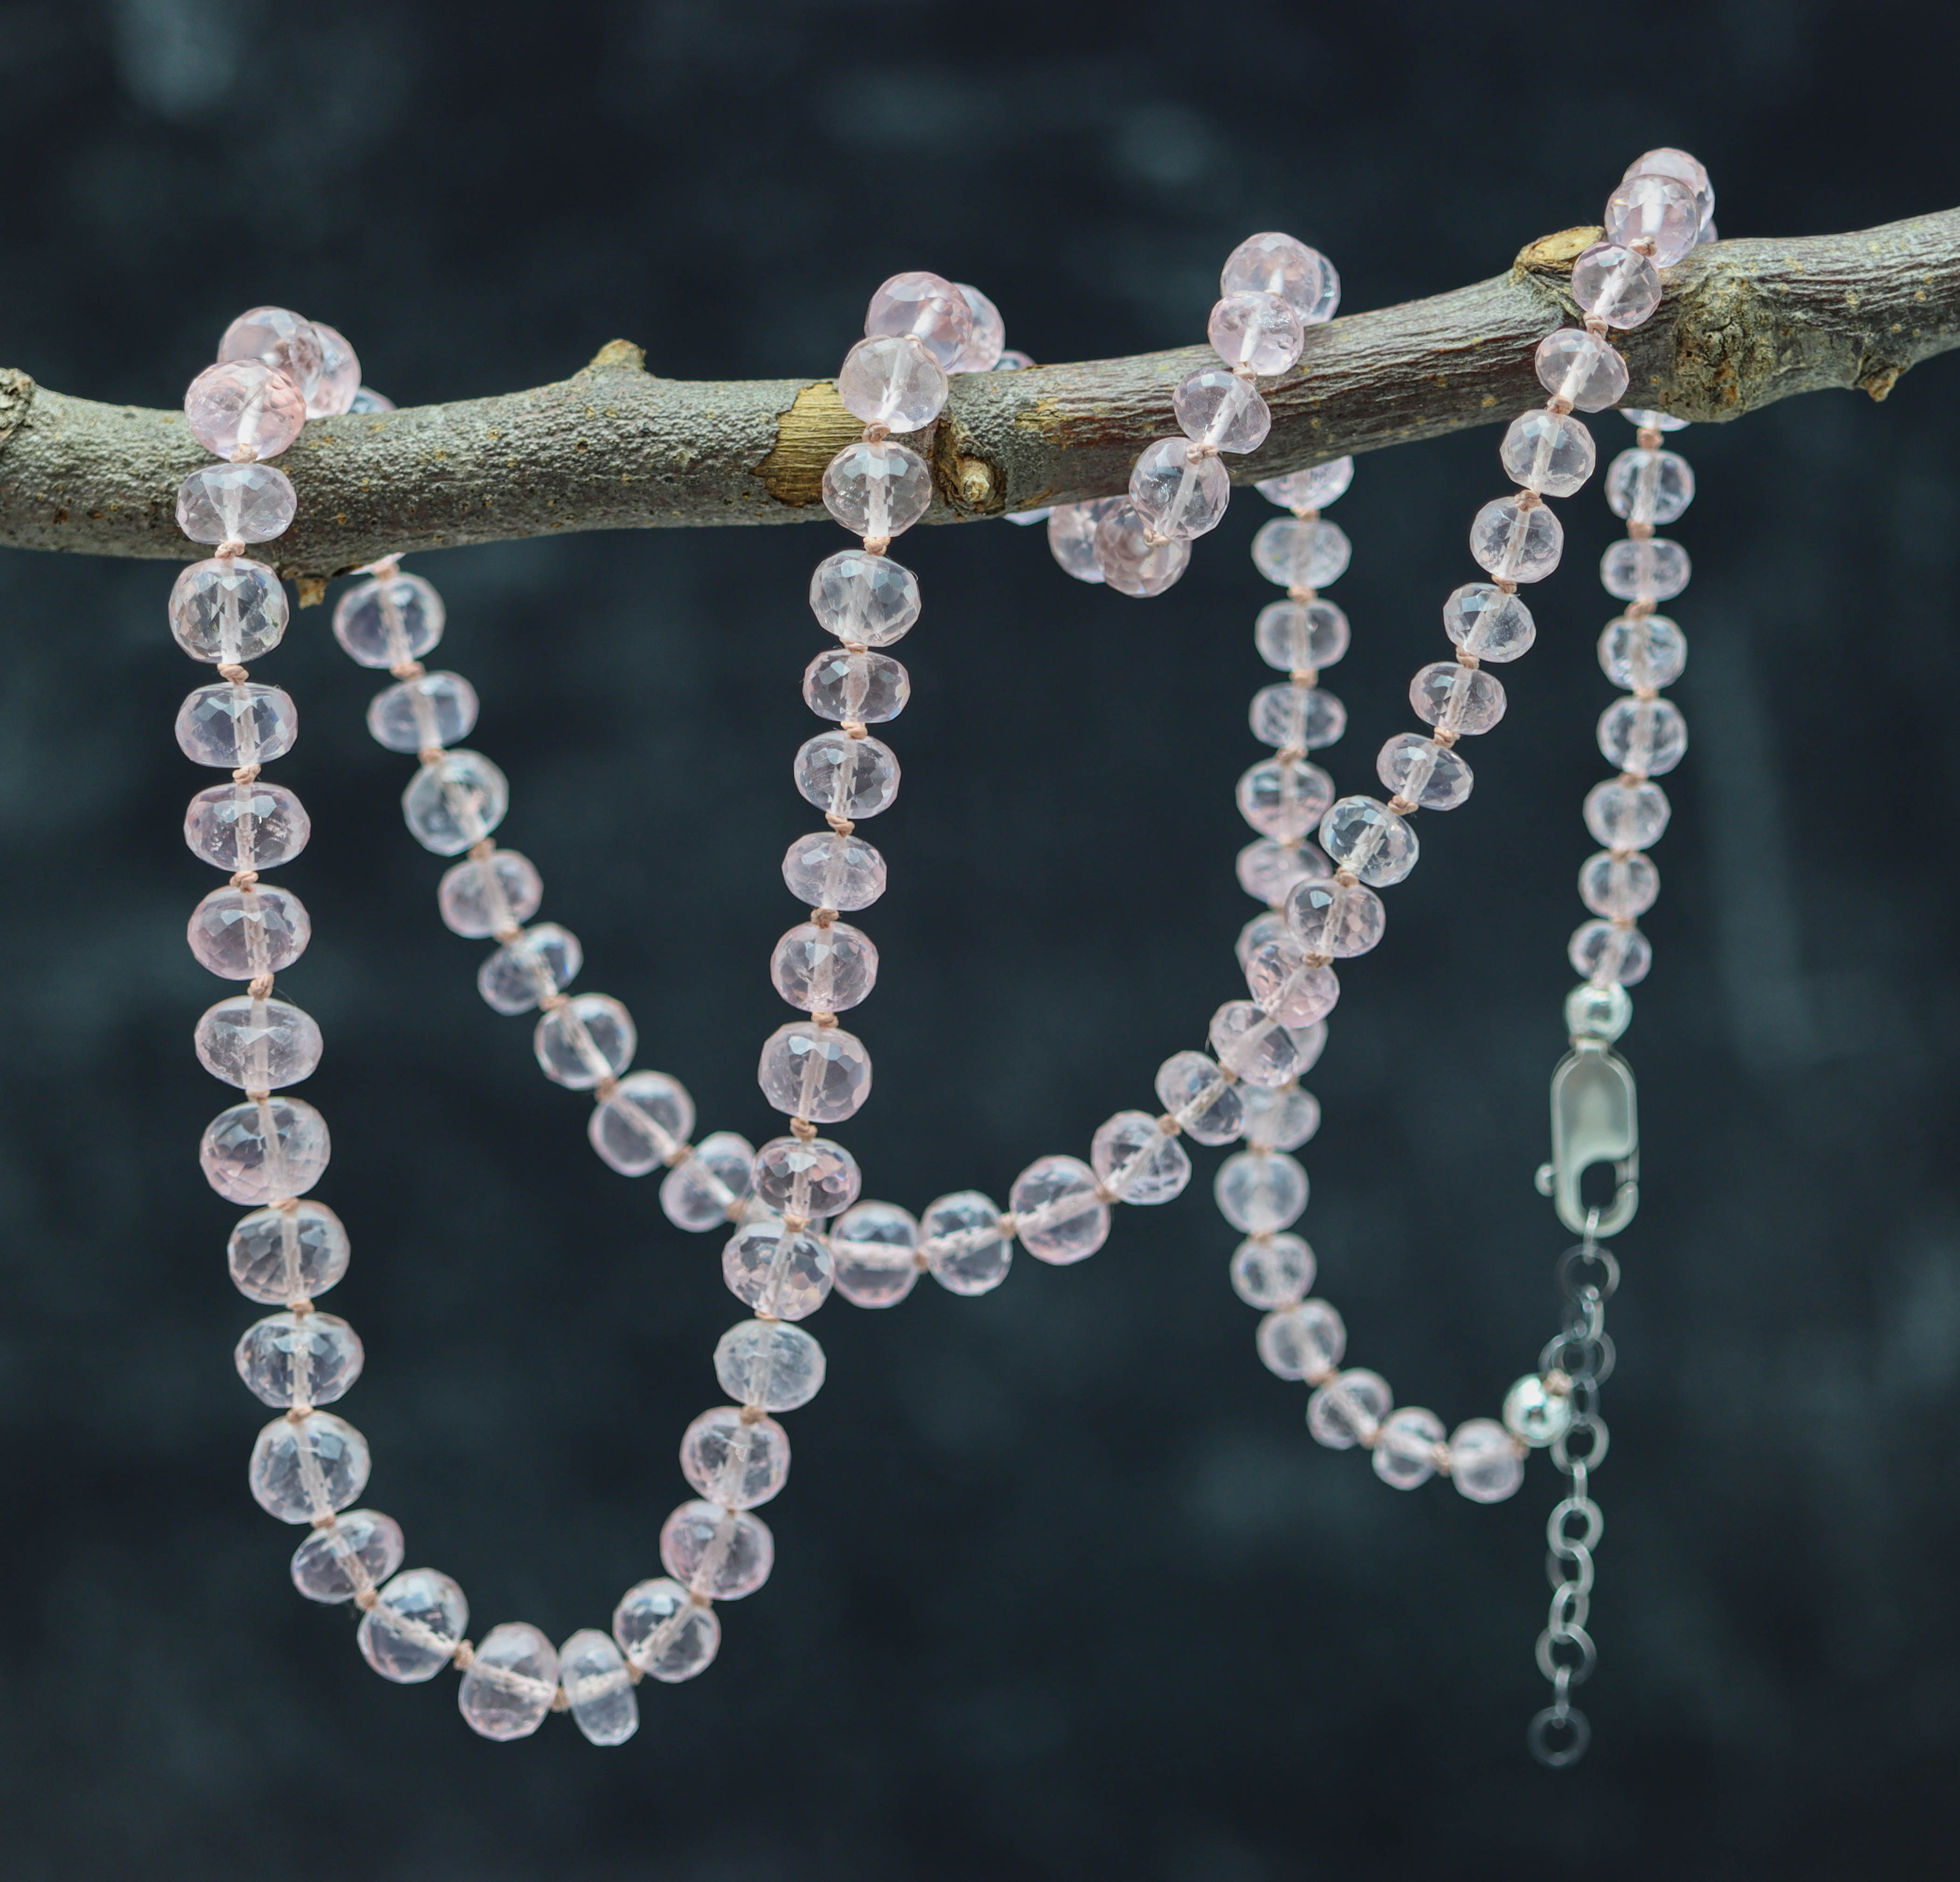 Madagascar Rose Quartz Hand Knotted Bead Necklace Sterling Silver